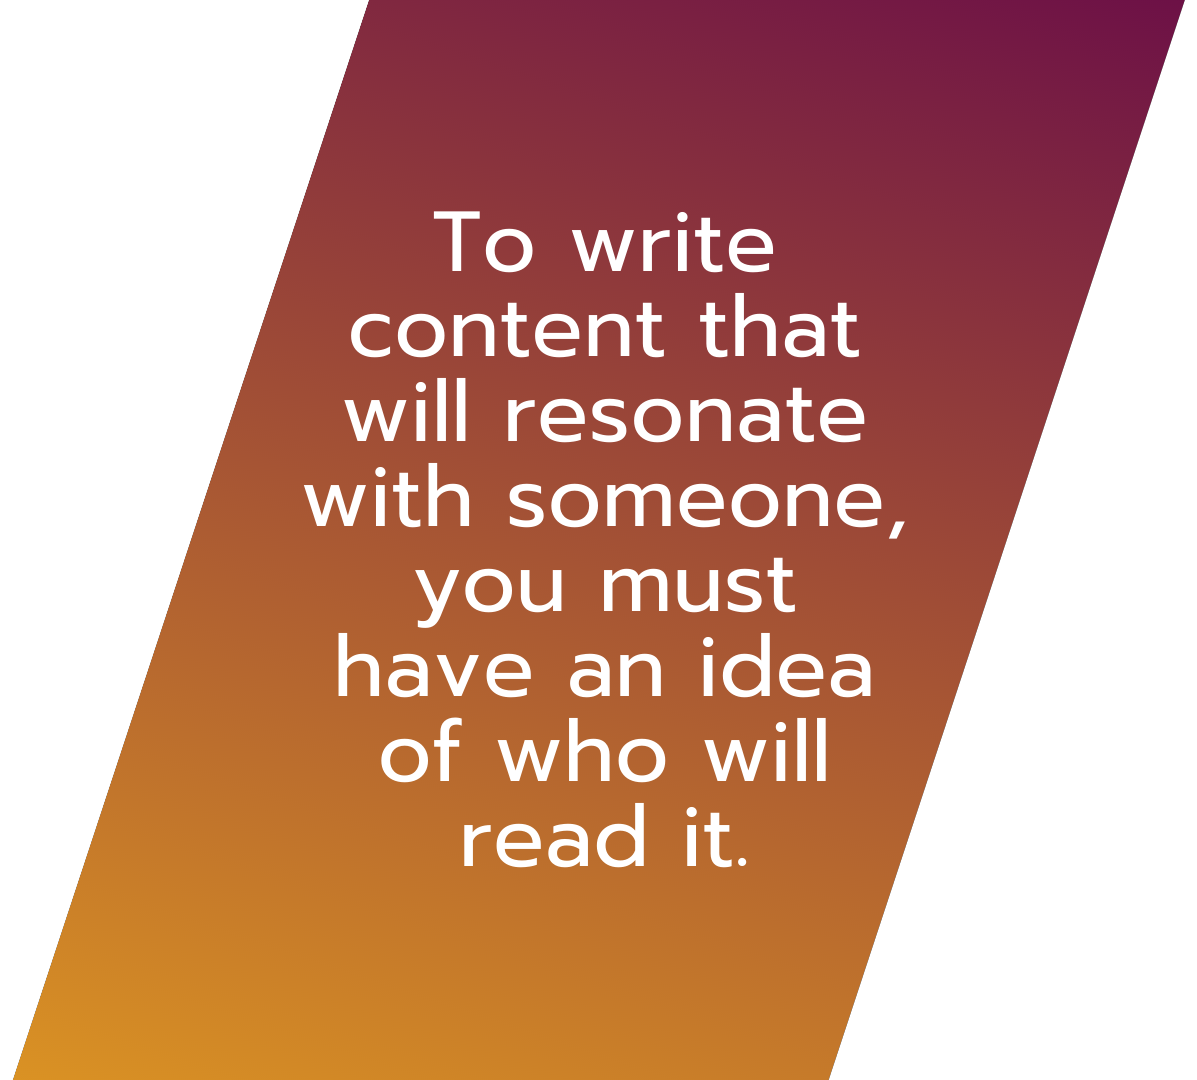 To write content that will resonate with someone, you must have an idea of who will read it. why audience is important in writing